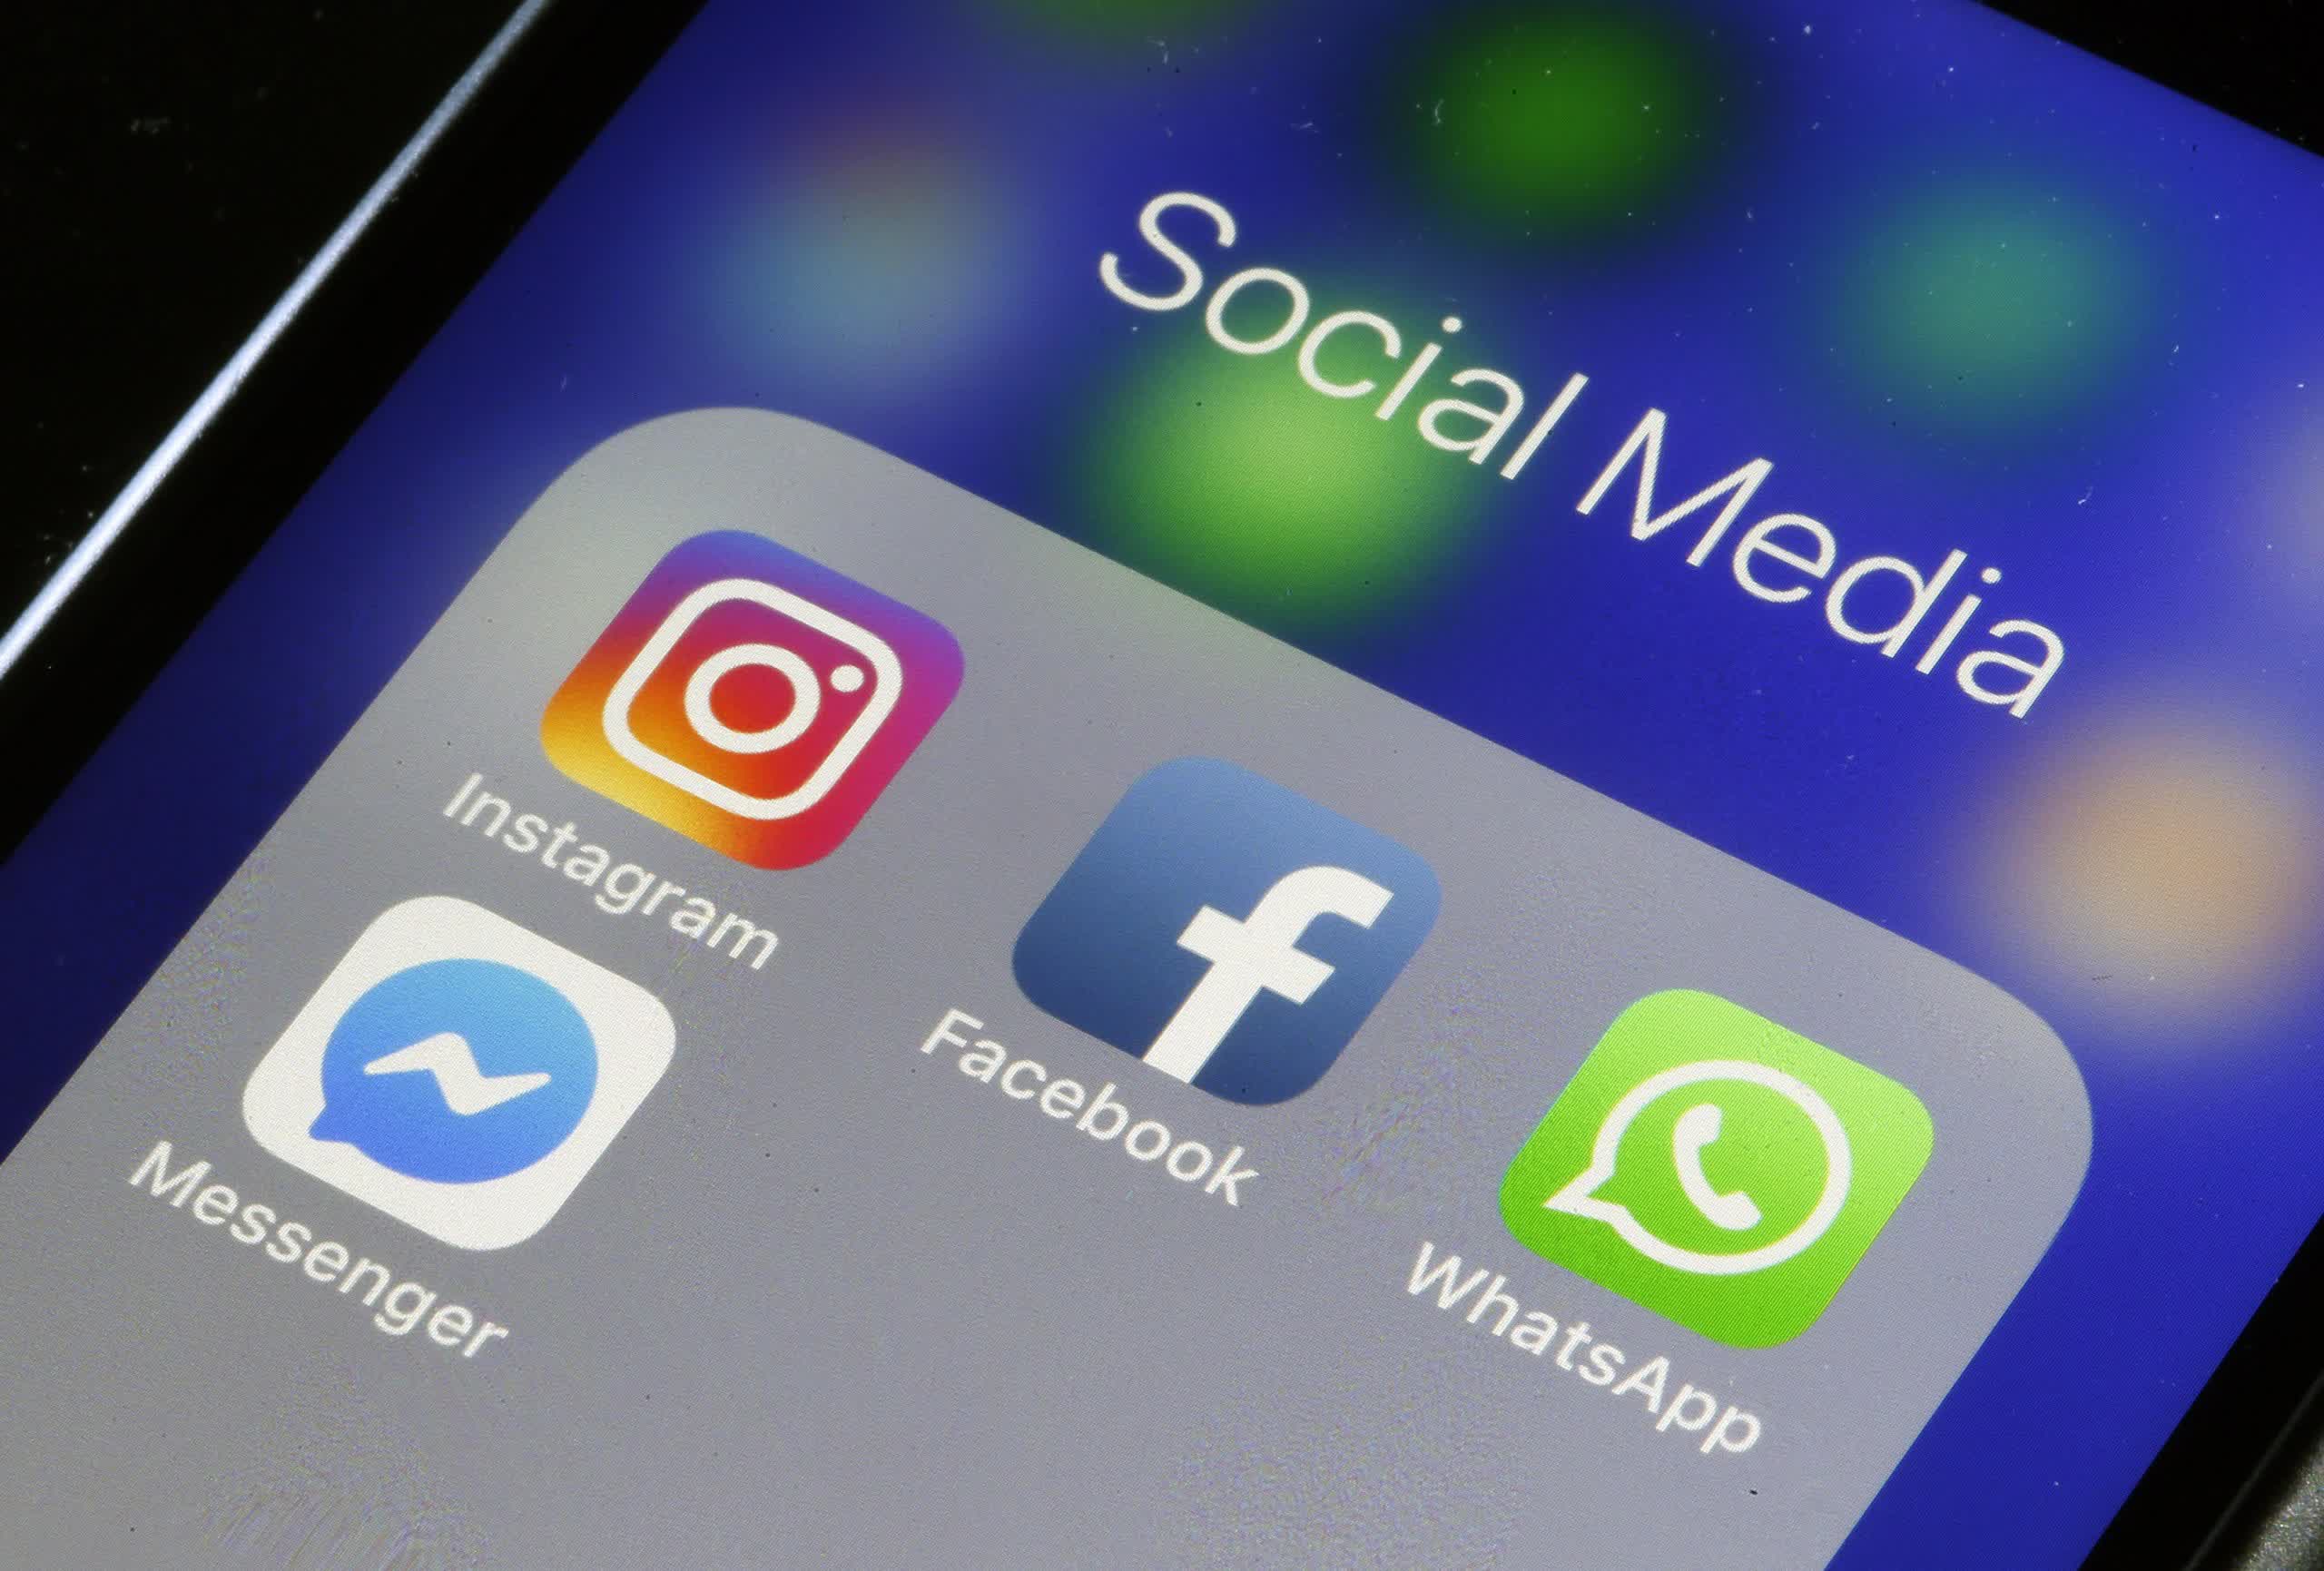 Russian court finds Facebook and Instagram guilty of extremist activity but won't ban WhatsApp